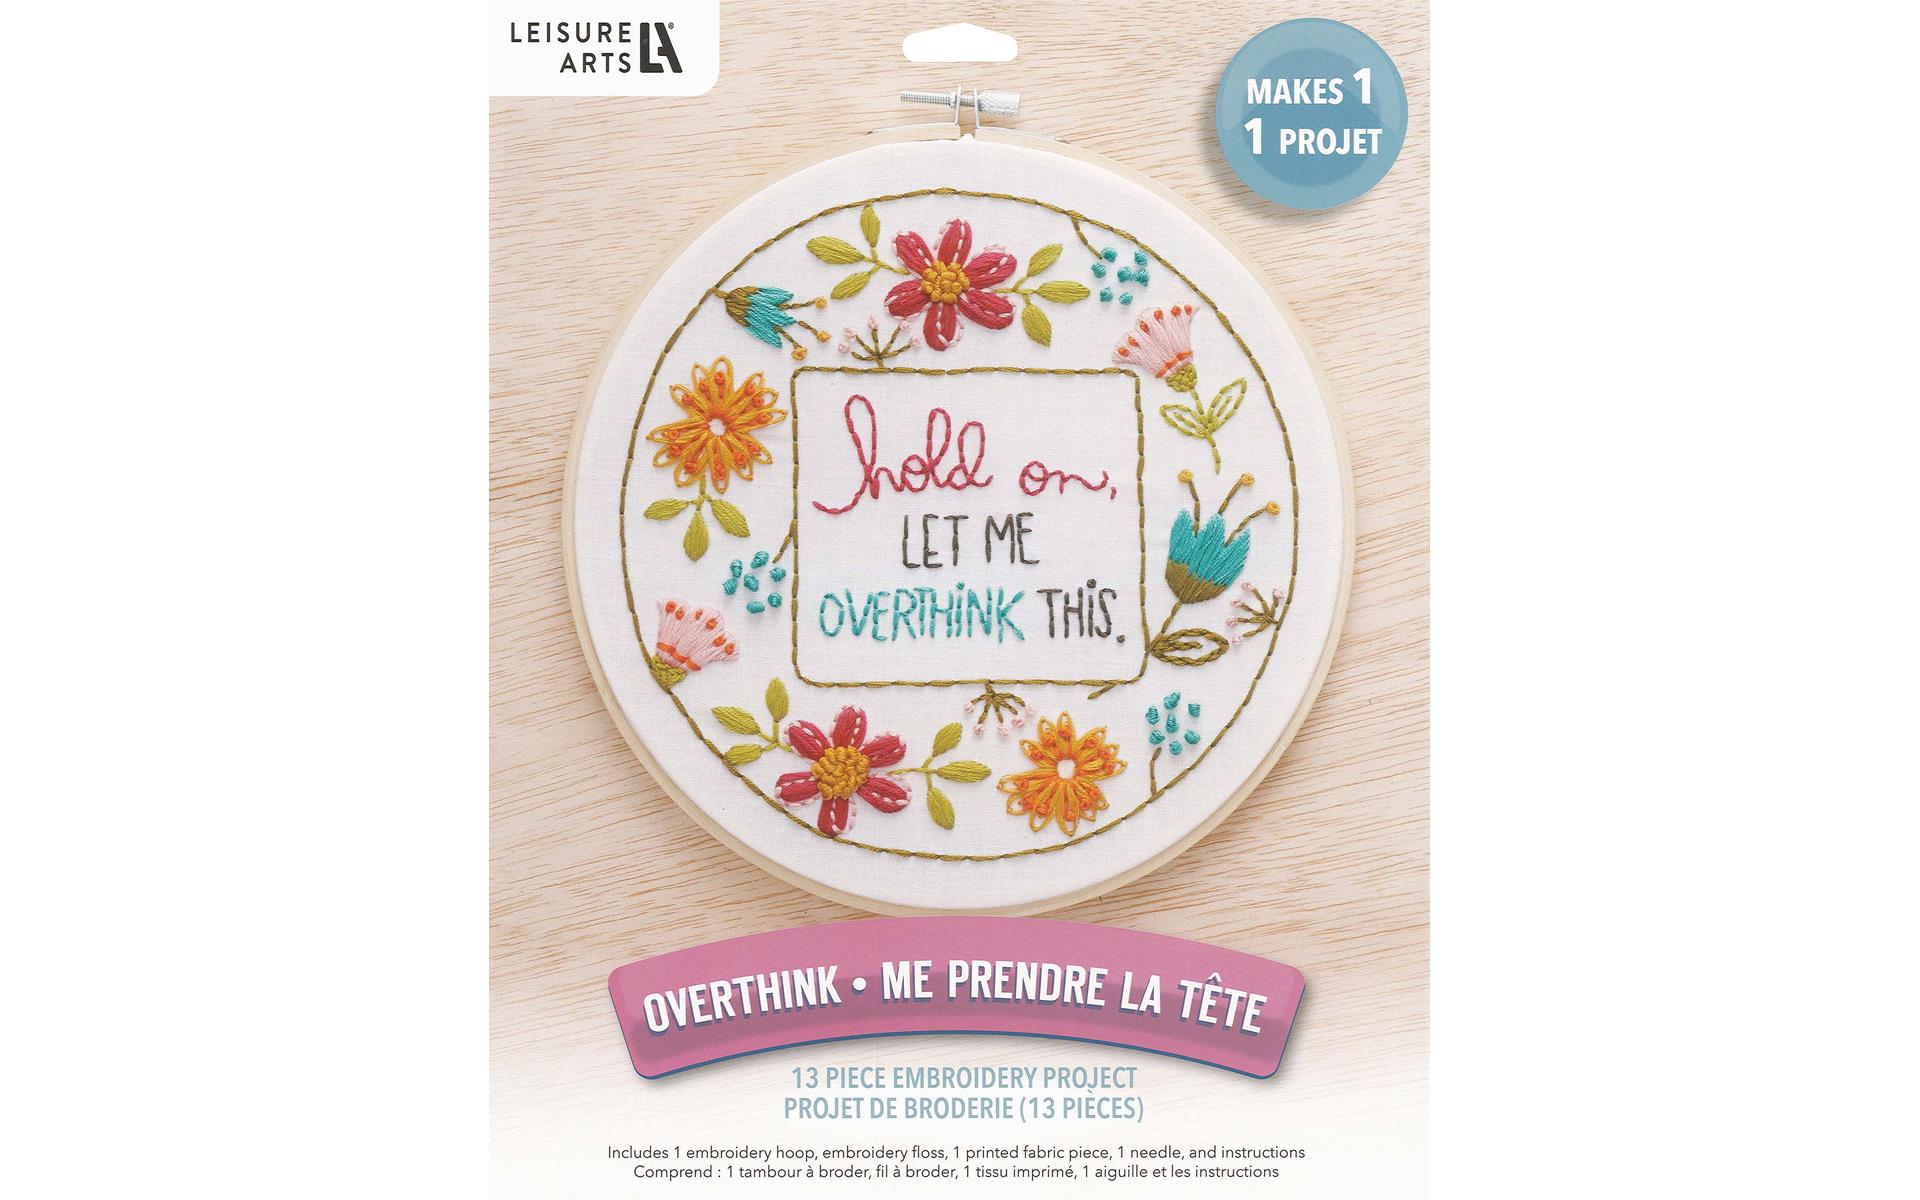 Leisure Arts Embroidery Kit 8 Hoop Overthink - embroidery kit for beginners  - embroidery kit for adults - cross stitch kits - cross stitch kits for  beginners - embroidery patterns